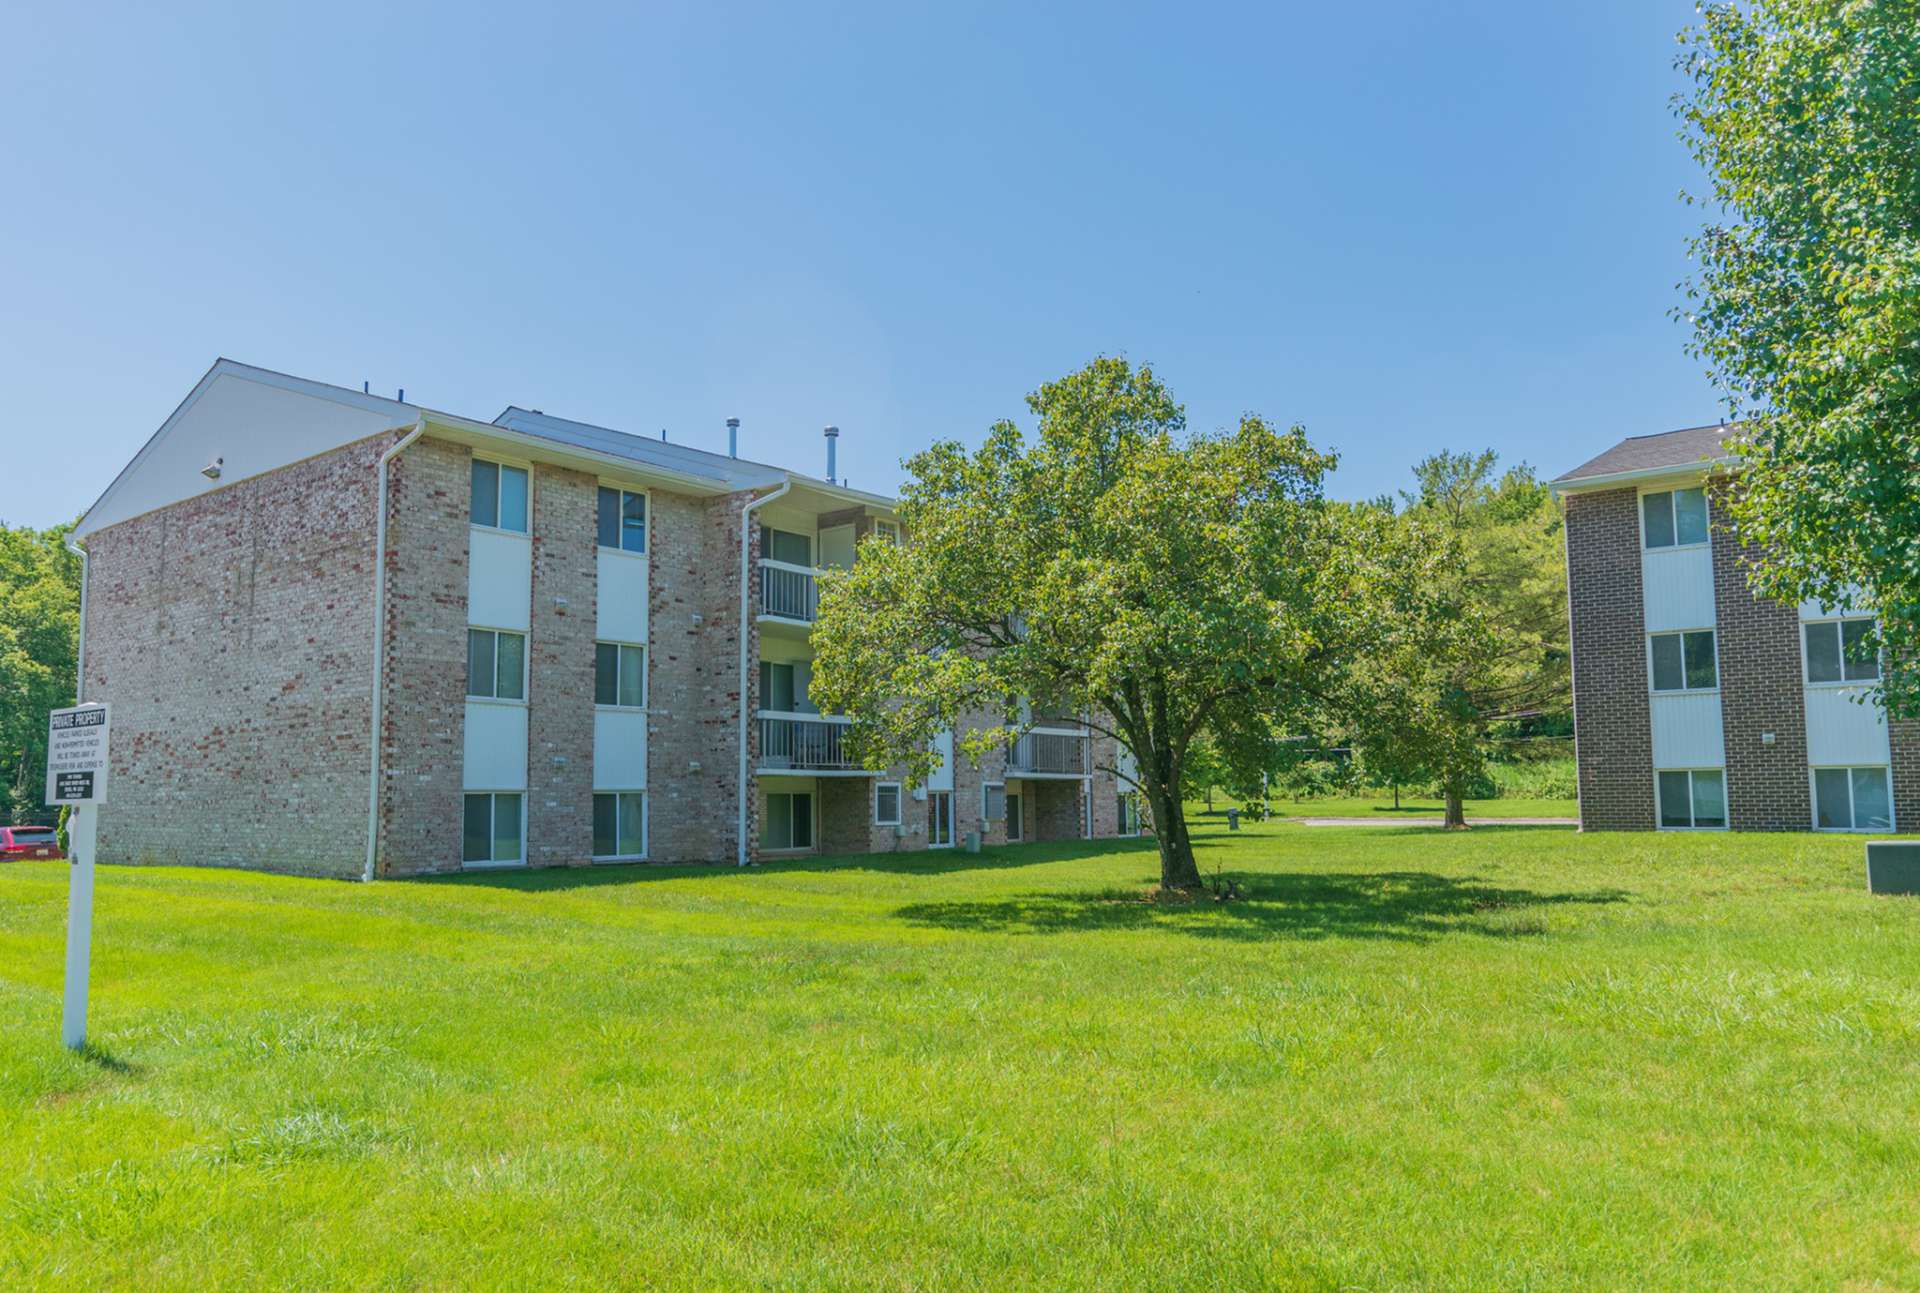 The exterior of an apartment building at Chesapeake Village apartments, fitted with a lawn, and trees